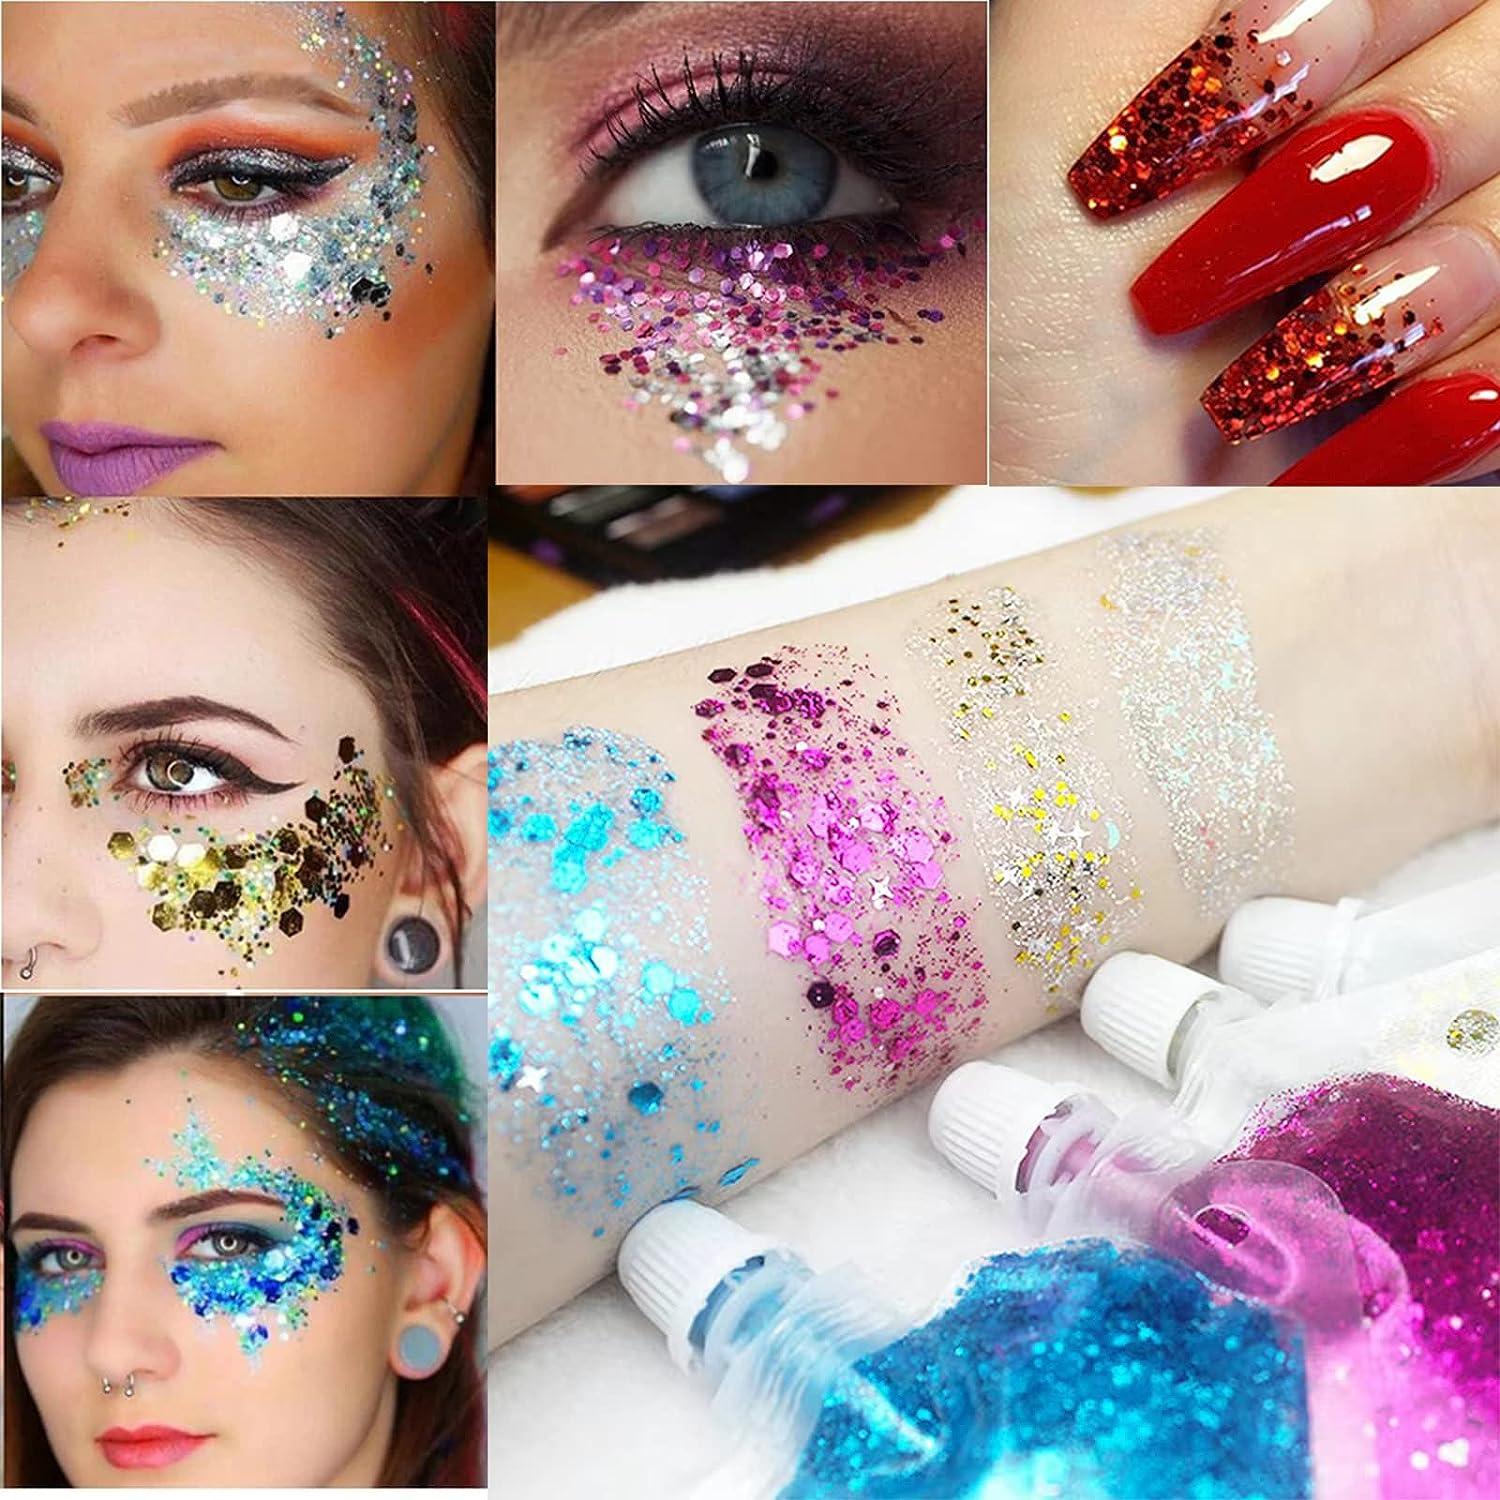 Body Glitter Gel Eye Face Glitter Makeup Sequins Liquid Nail Glitter  Eyeshadow Cosmetic Laser Powder for Christmas Party Rave Accessories Chunky  Glitter Gel for Lip Hair Makeup Silver